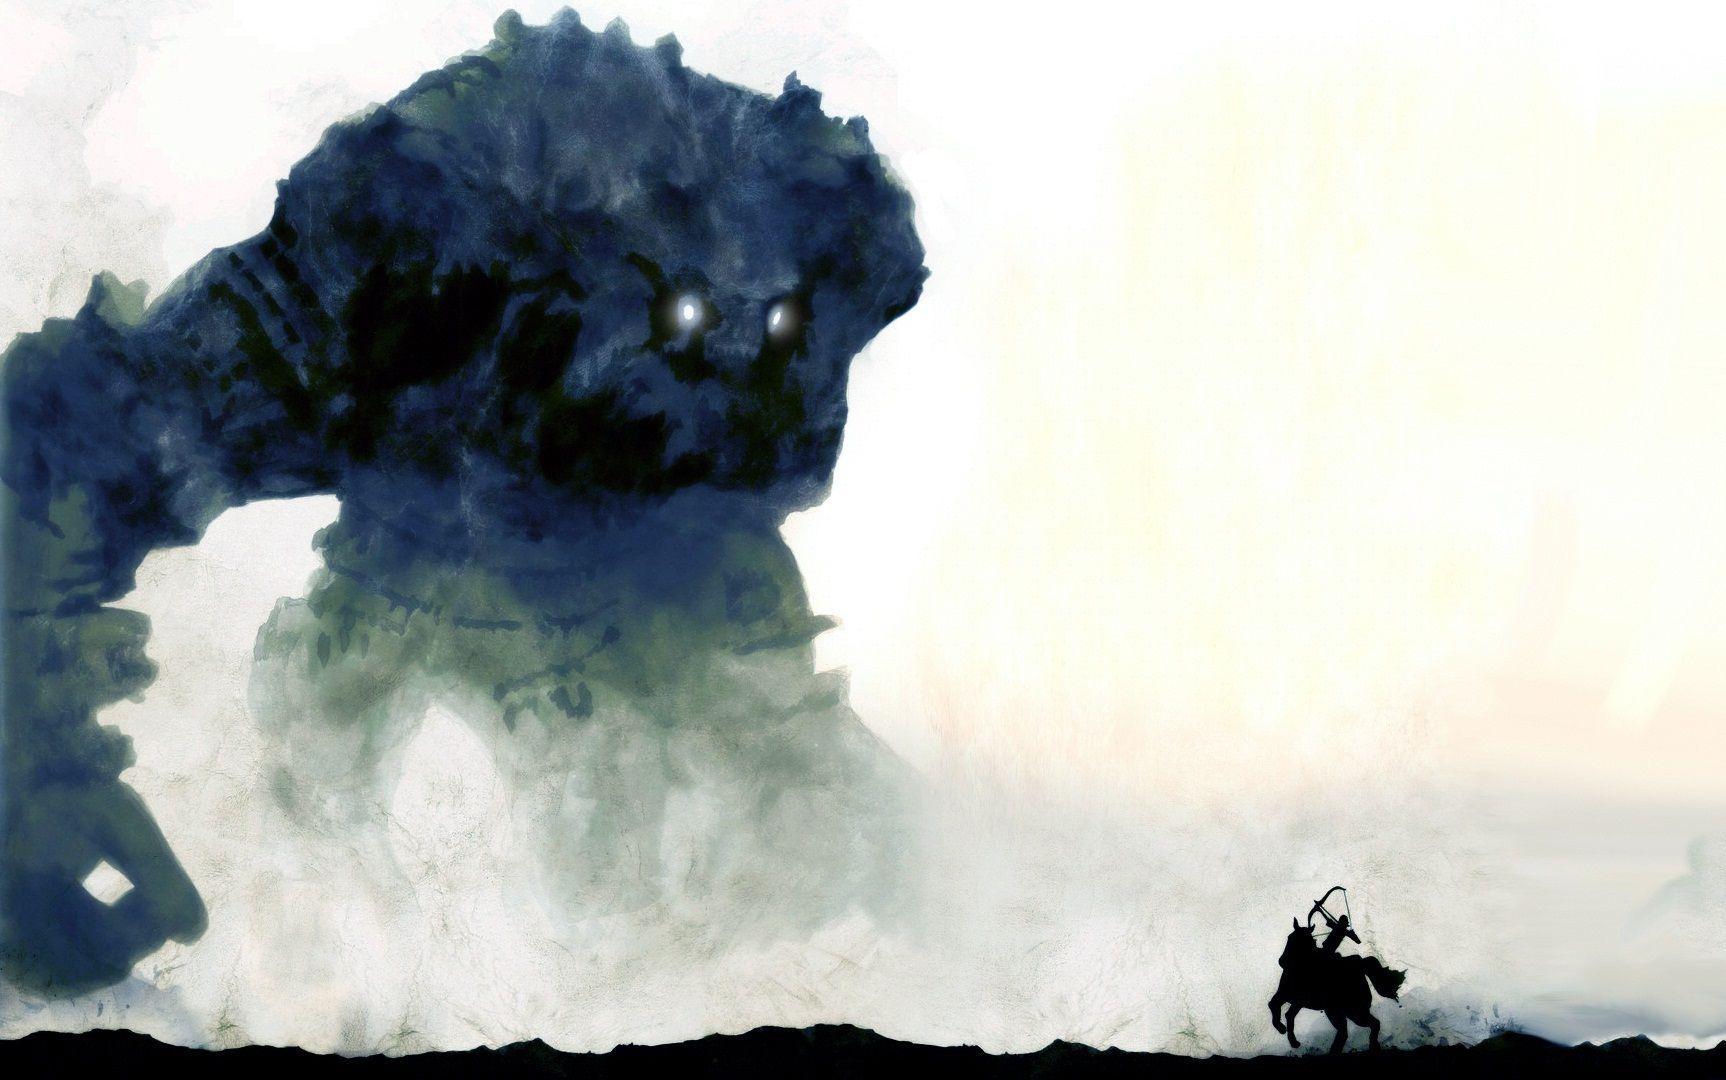 Shadow of the Colossus HD Wallpaper and Background